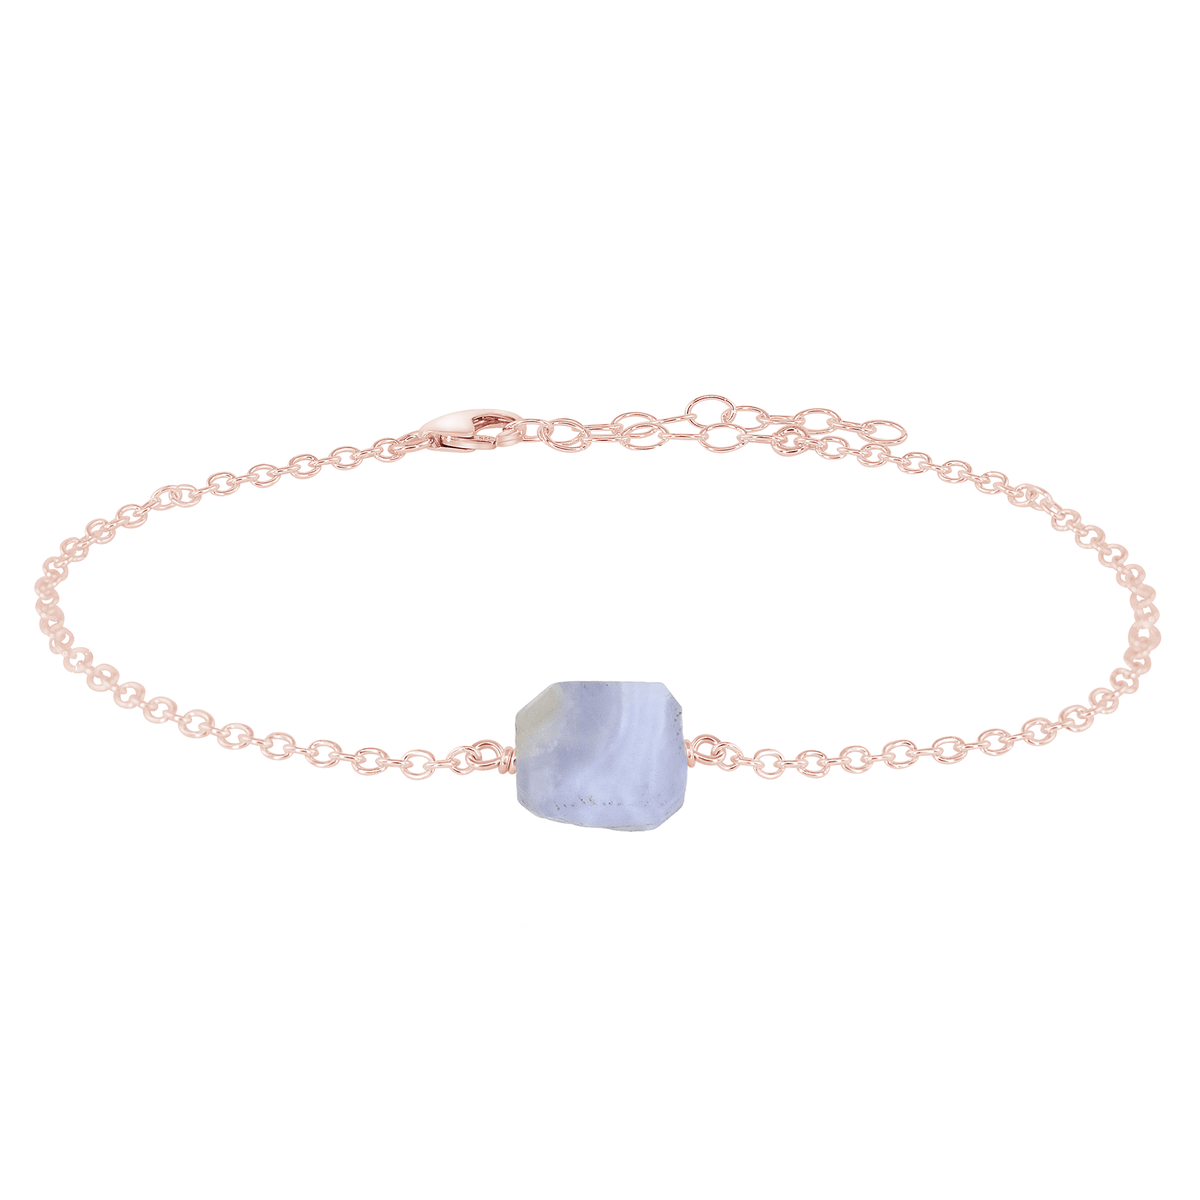 Raw Nugget Anklet - Blue Lace Agate - 14K Rose Gold Fill - Luna Tide Handmade Jewellery